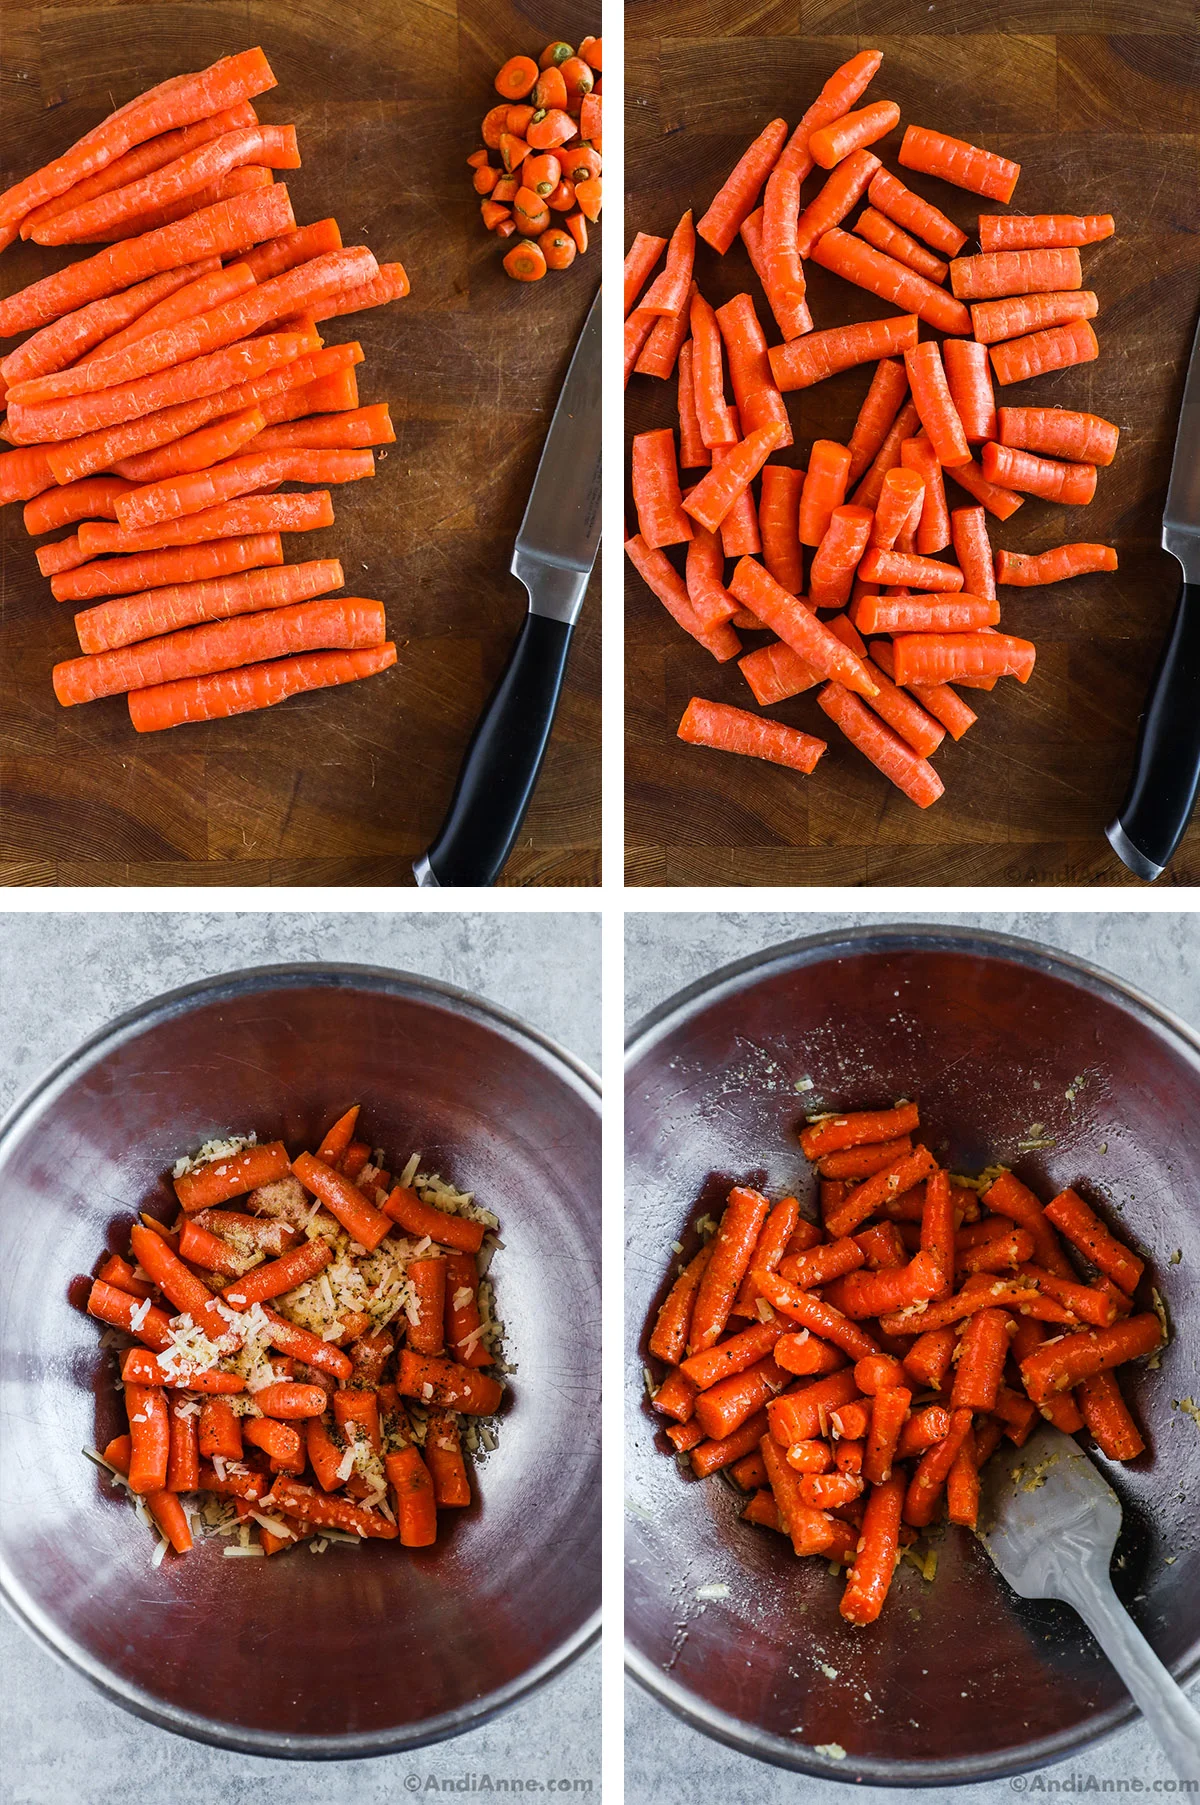 Chopped carrots on a cutting board, plus a bowl of chopped carrots tossed with oil, spices and grated parmesan,